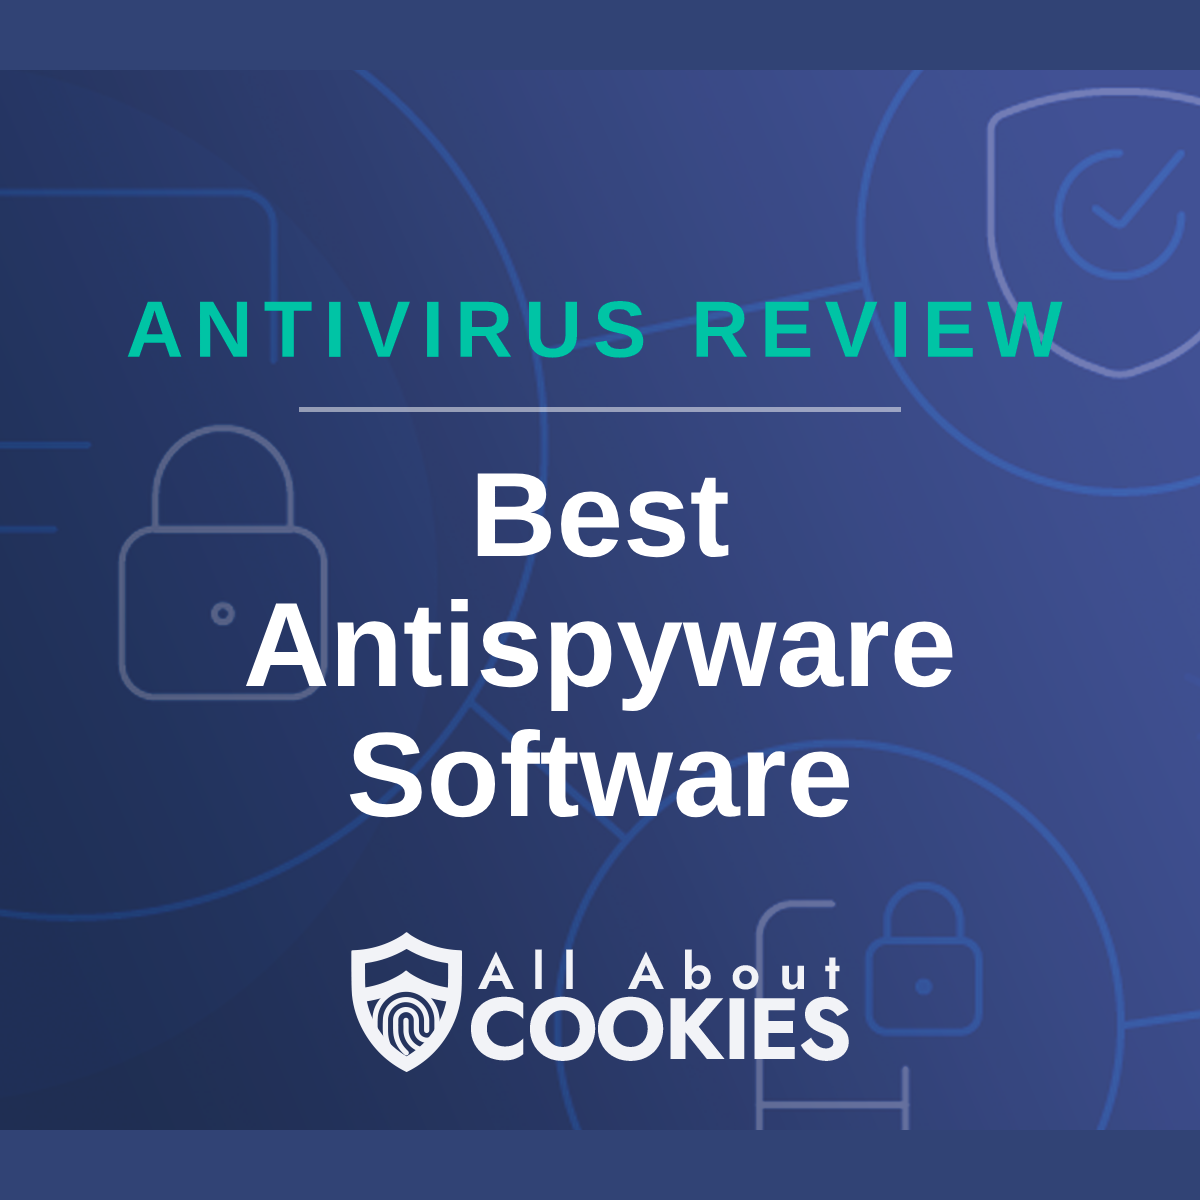 Blue background with text reading &quot;Antivirus Review Best Antispyware Software&quot; and the All About Cookies logo.